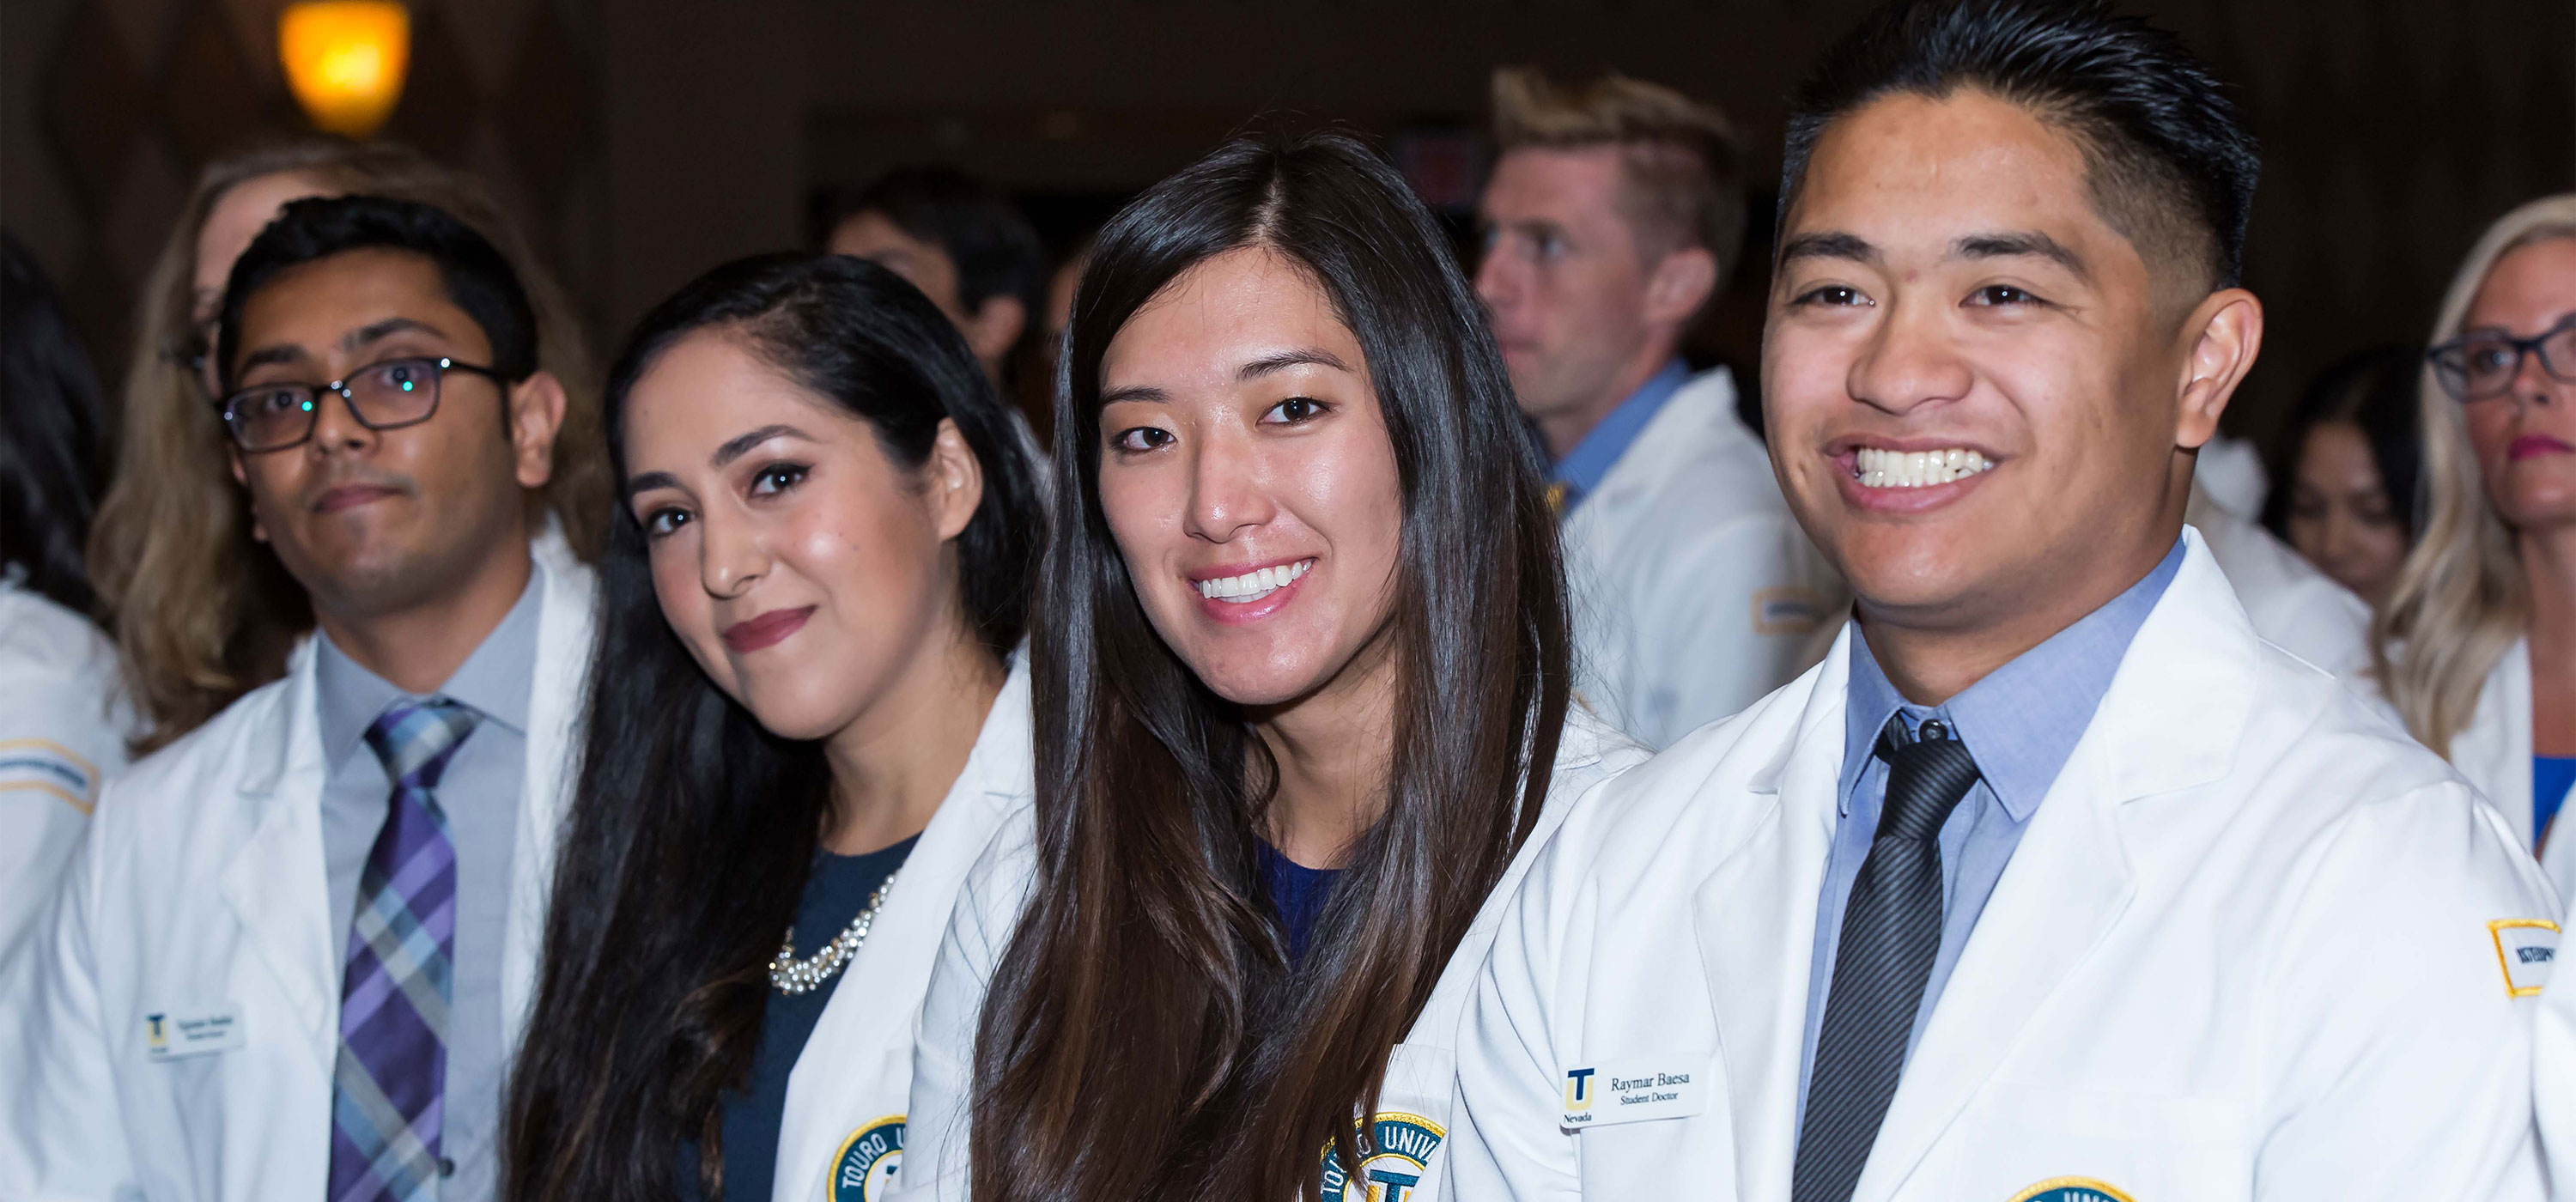 DO Class of 2021 Students at their White Coat Ceremony